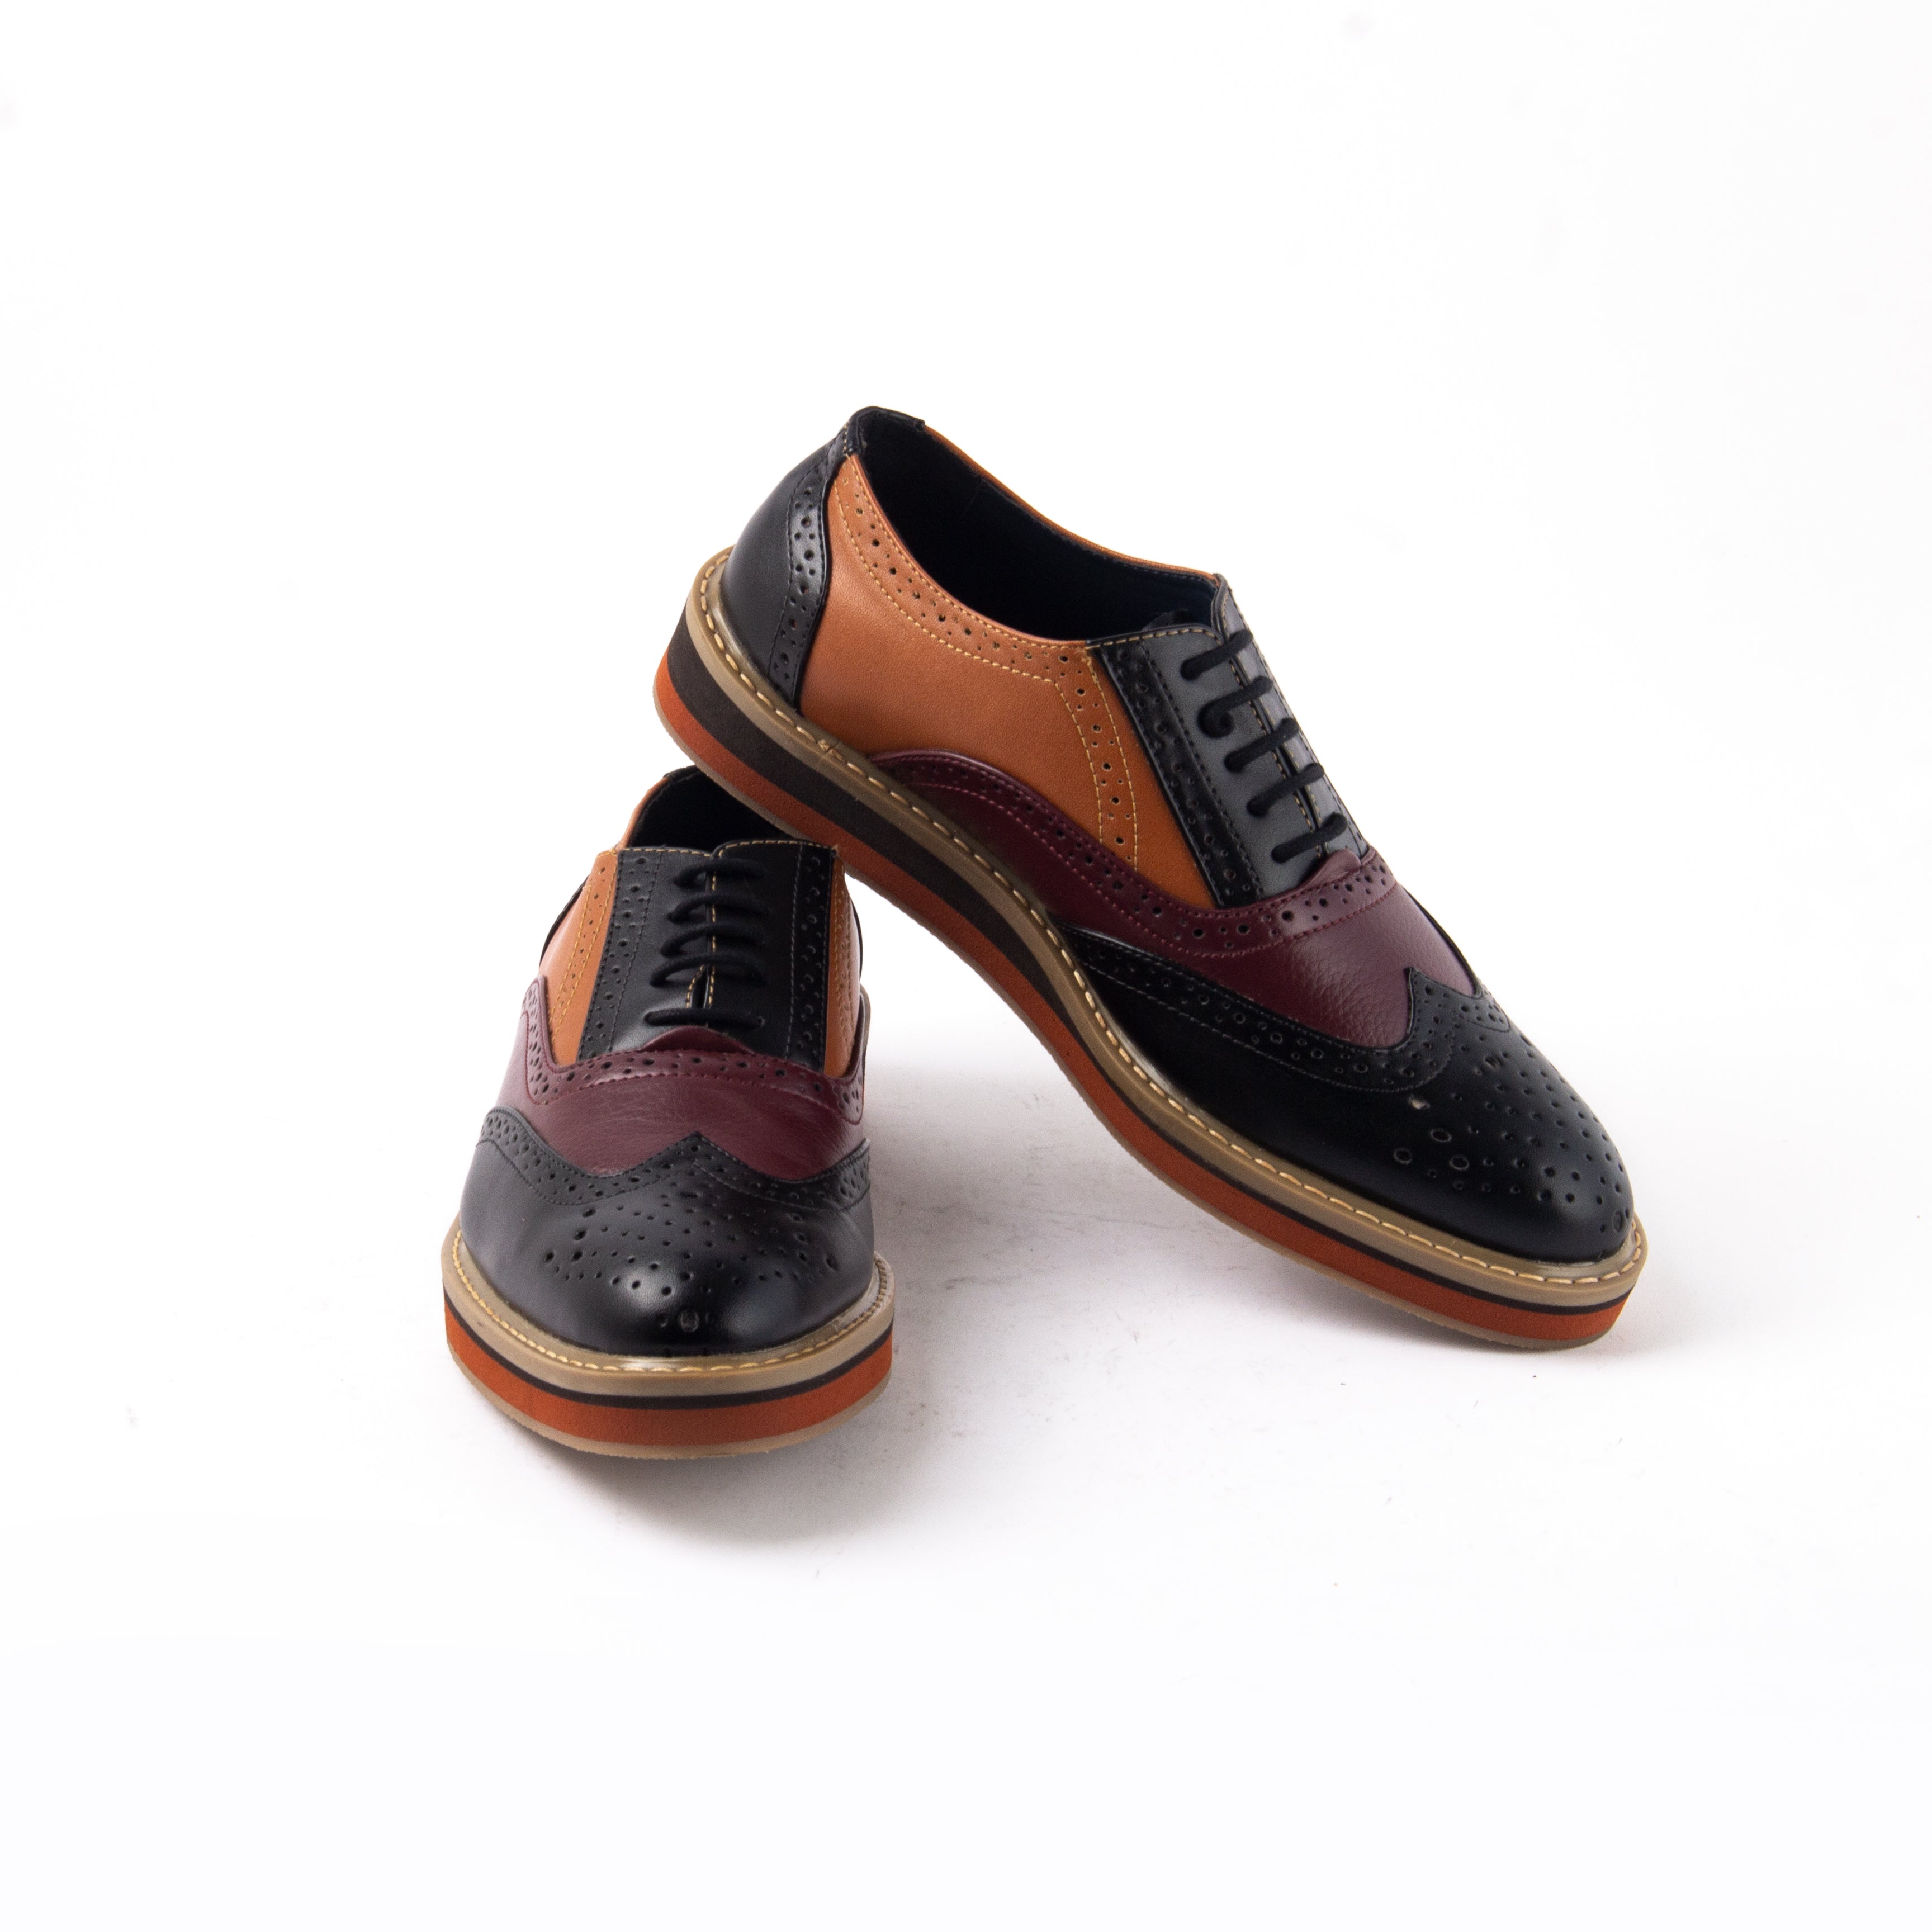 Beverly Tricolour Brogues - Black